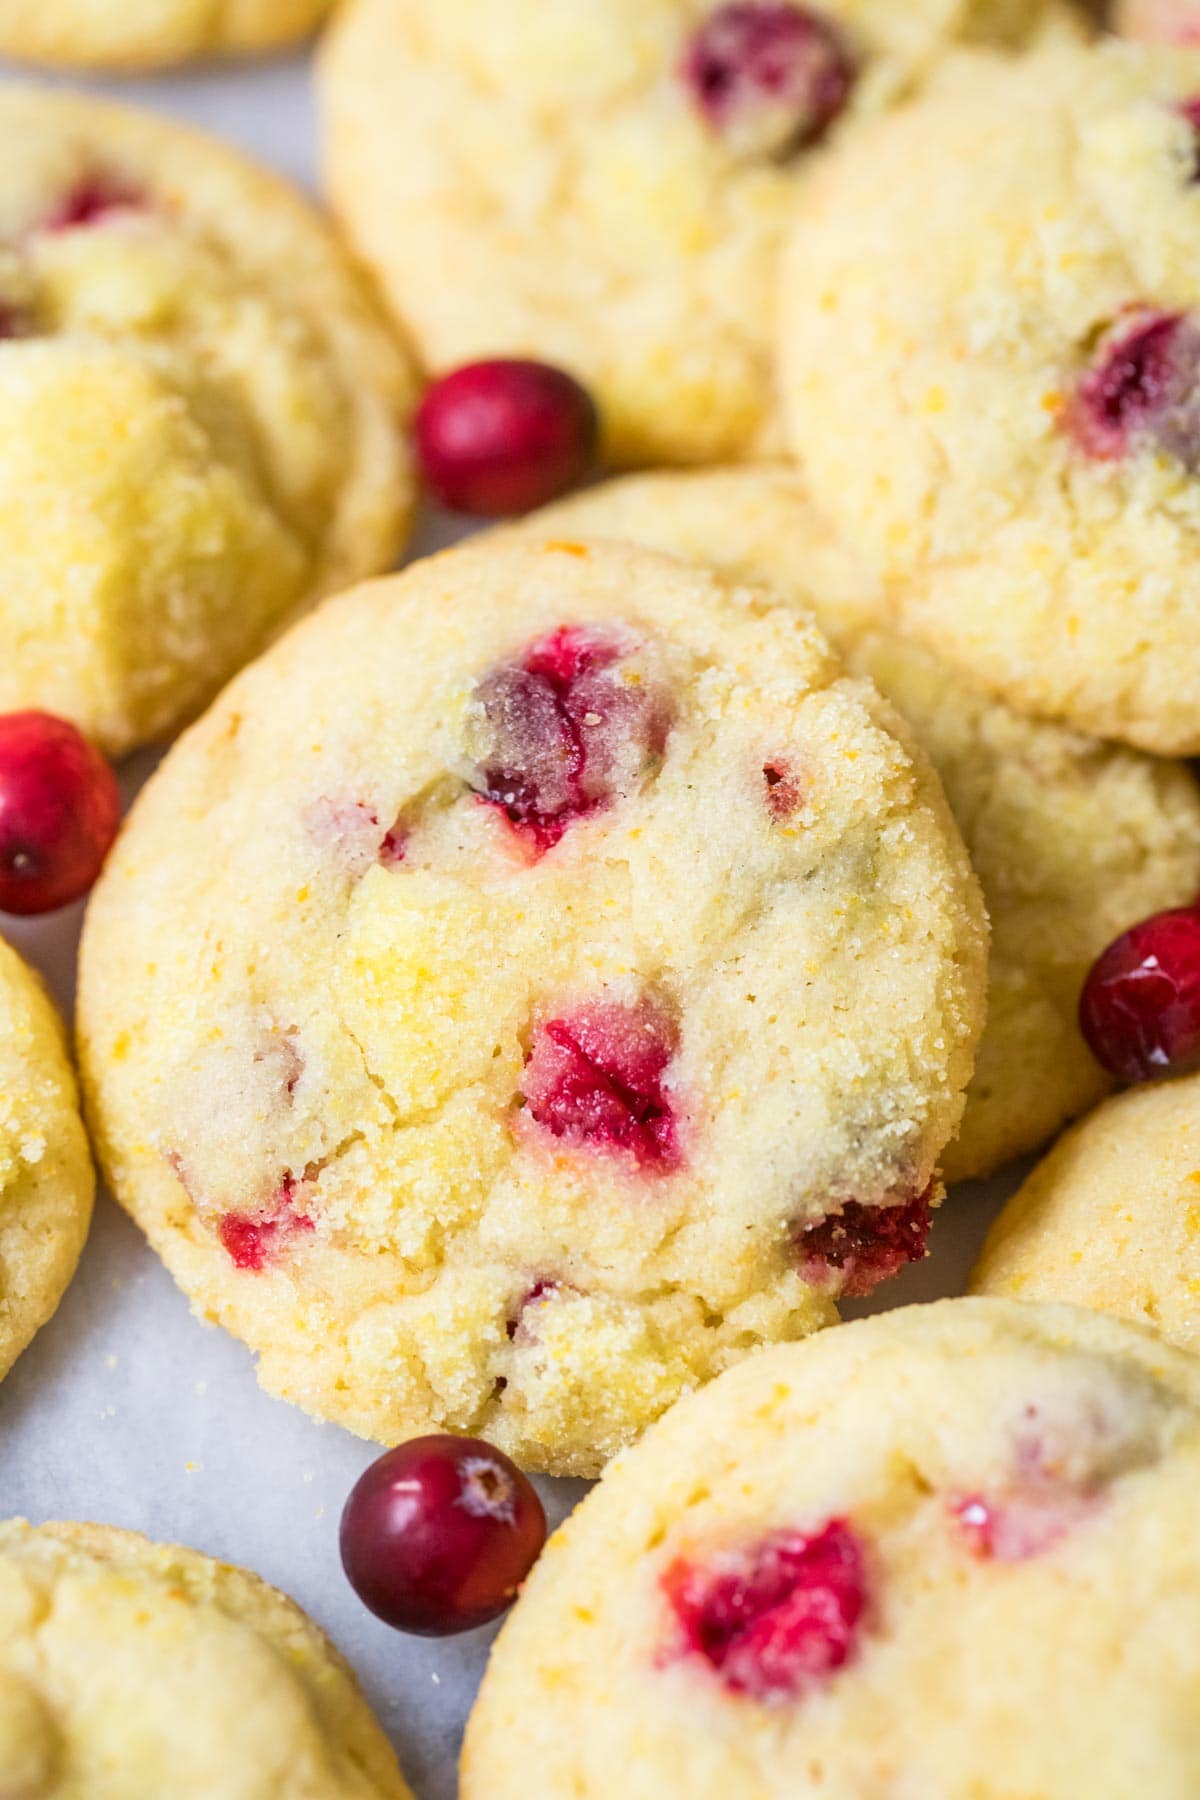 Orange cranberrry cookies in a pile surrounded by fresh cranberries.